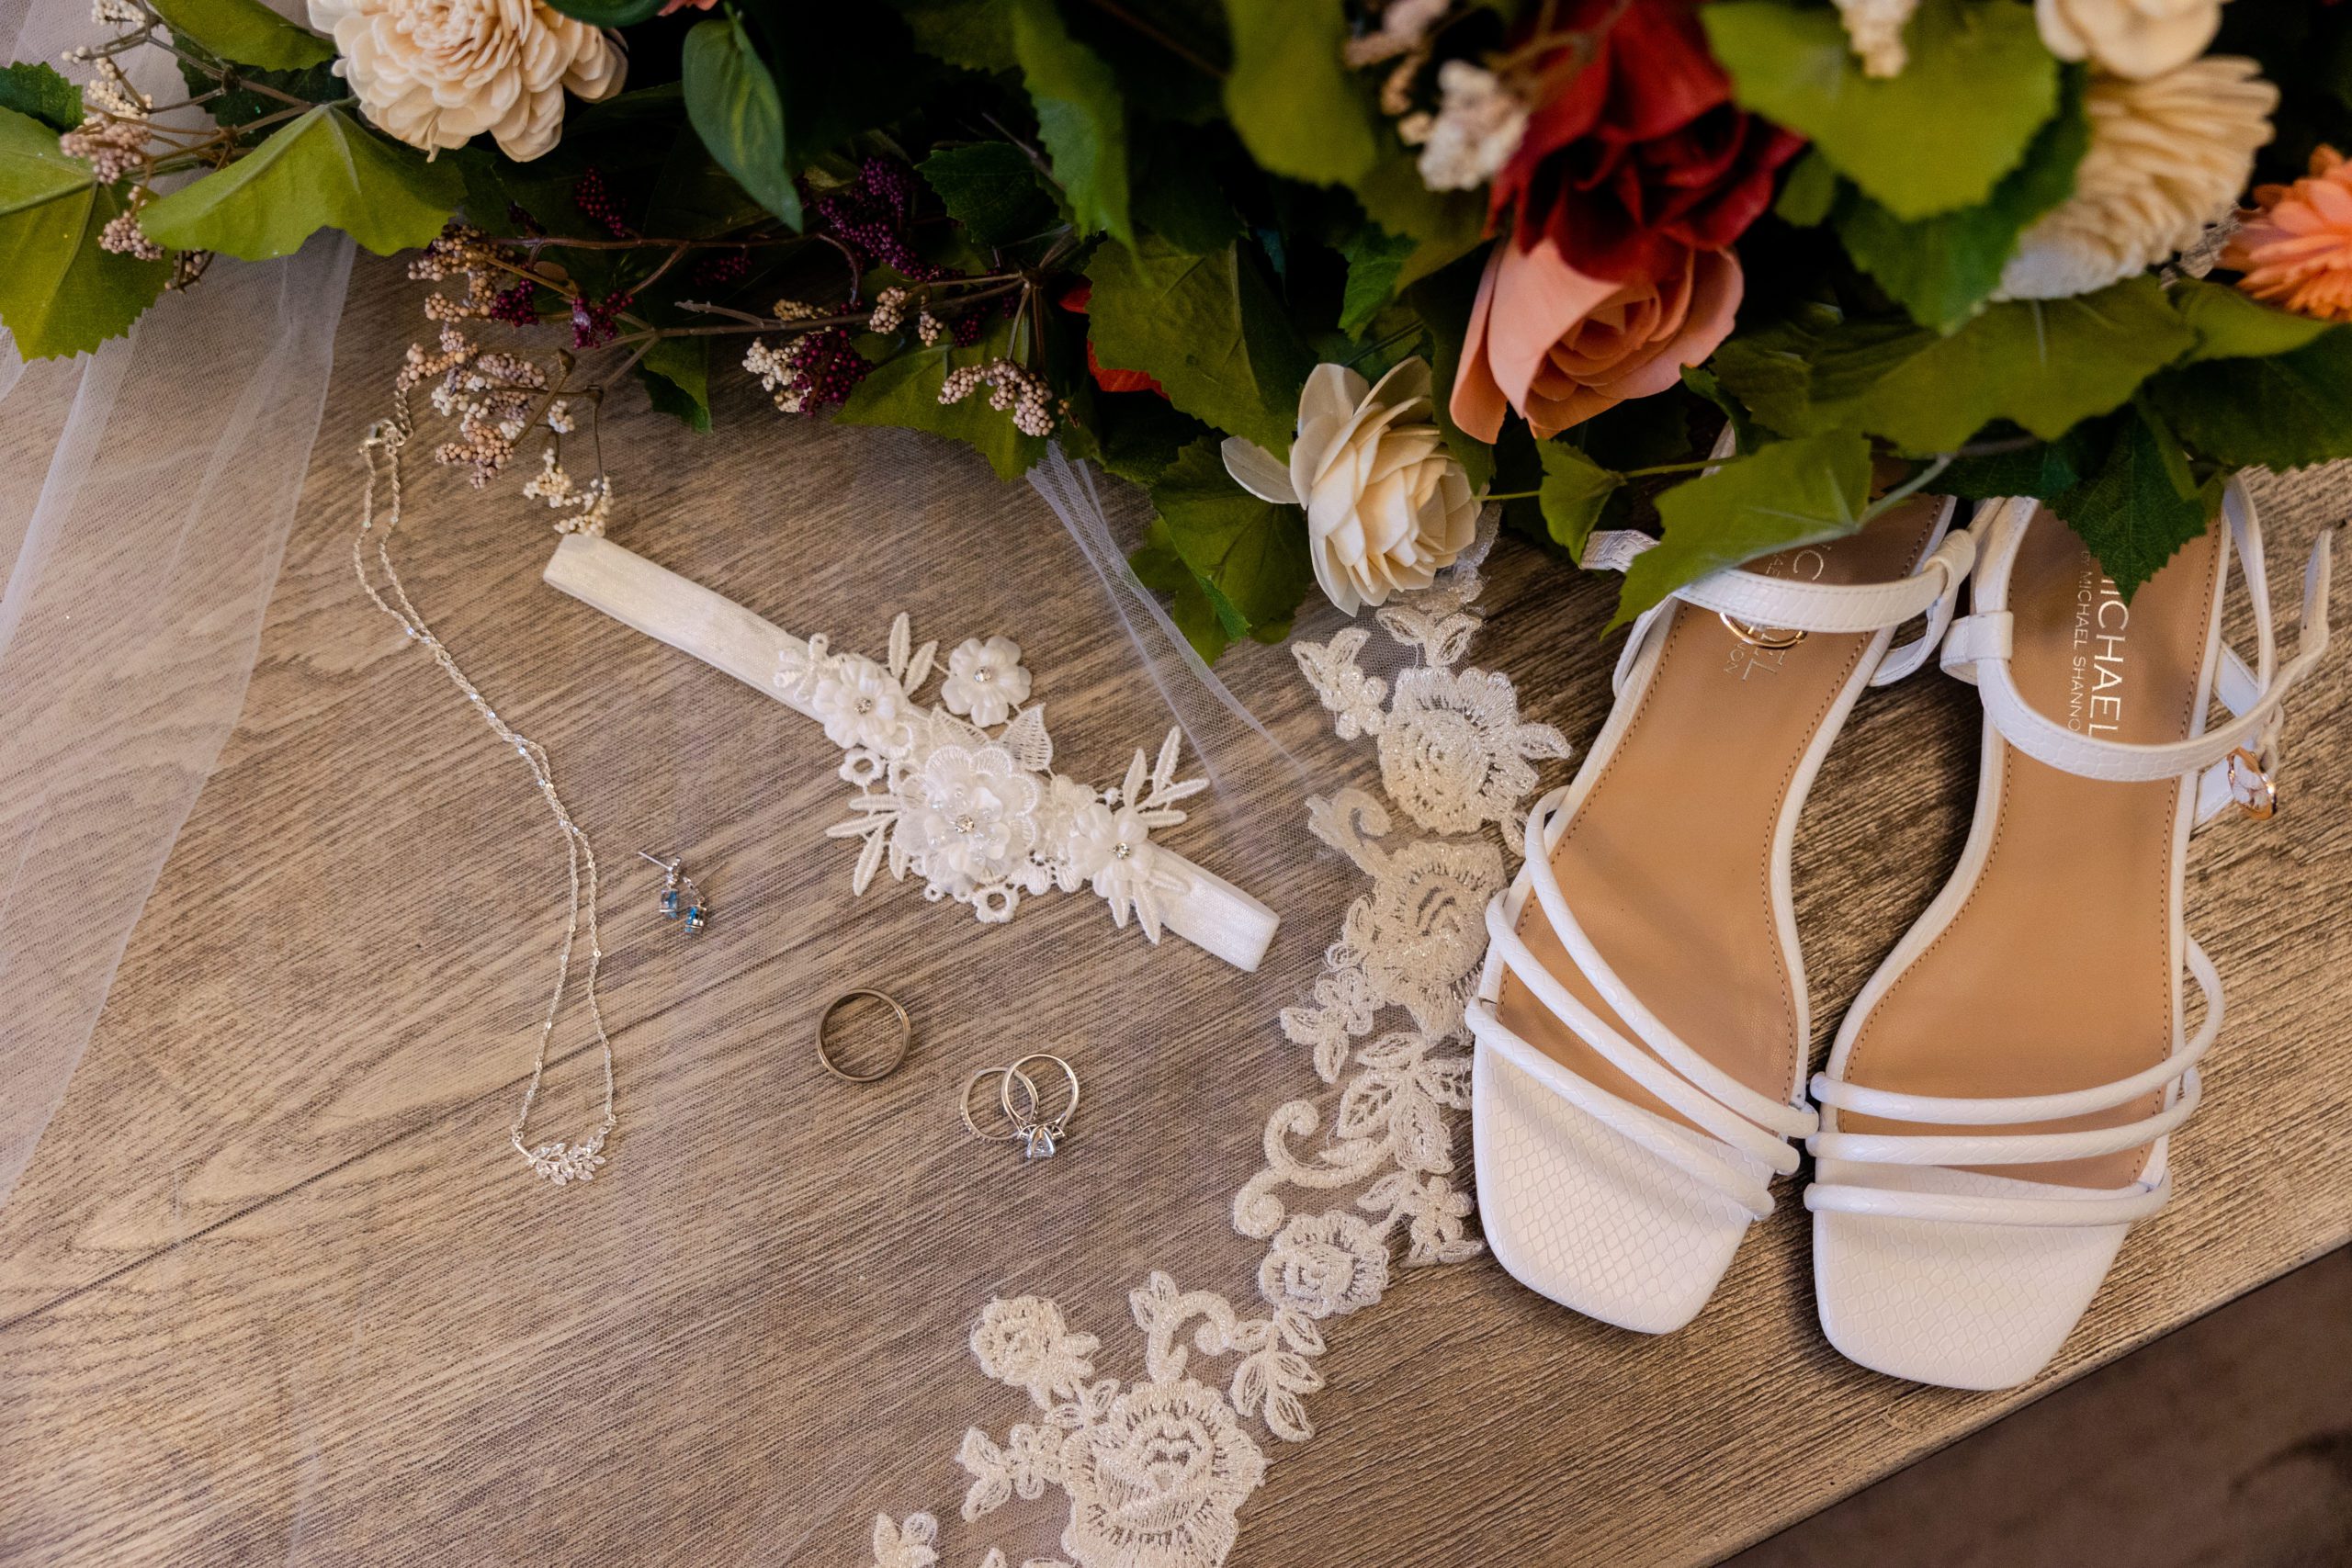 Bridal detail flat lay with garter, wedding rings, bridal jewelry, wedding shoes and Sola Wood Flower bouquet